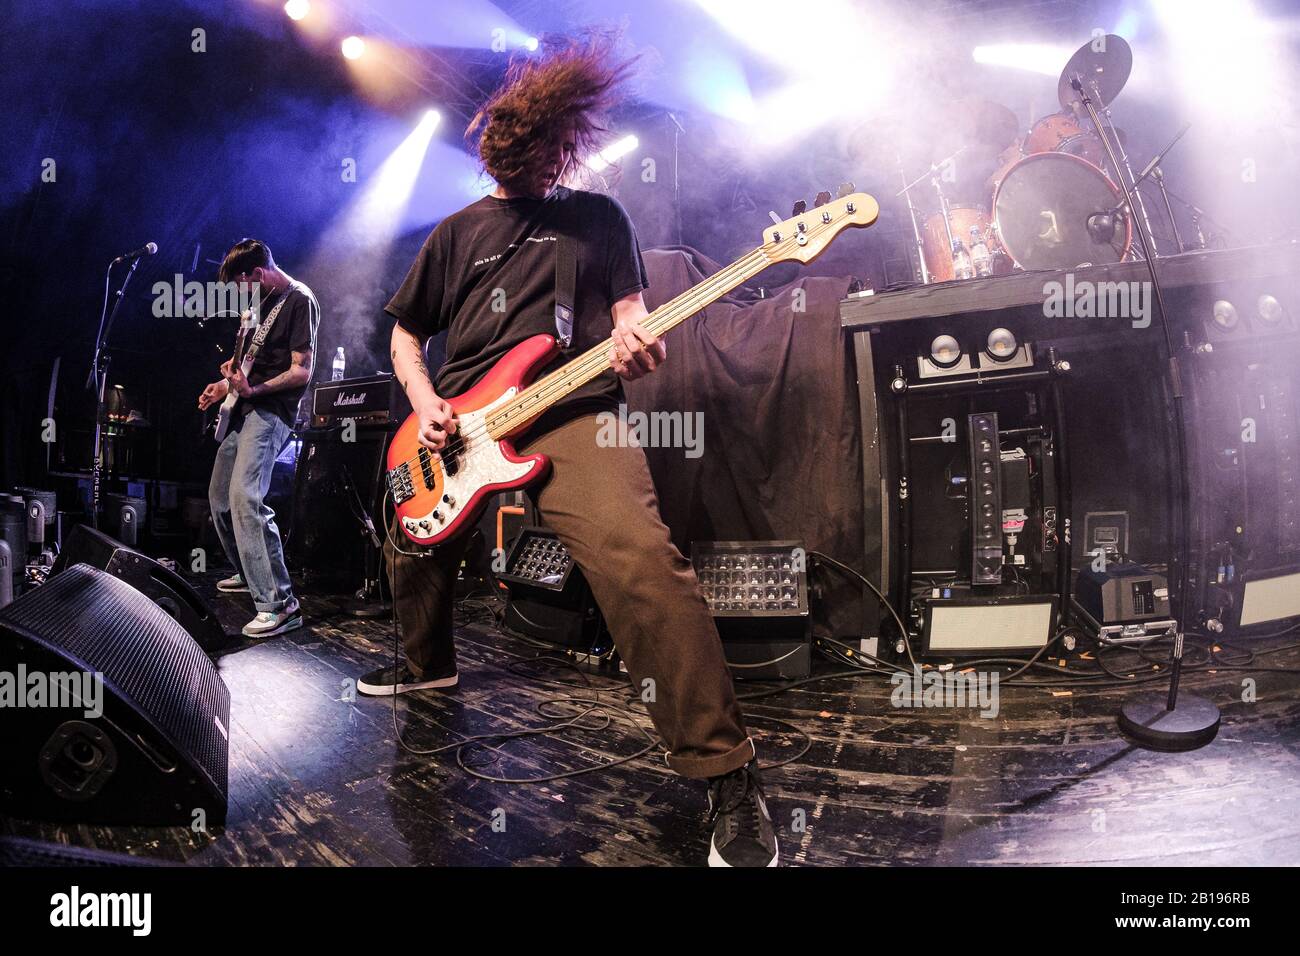 Solothurn, Switzerland. 19th, February 2020. The English hardcore punk band  Higher Power performs a live concert at Kofmehl in Solothurn. Here bass  player Ethan Wilkinson is seen live on stage. (Photo credit: